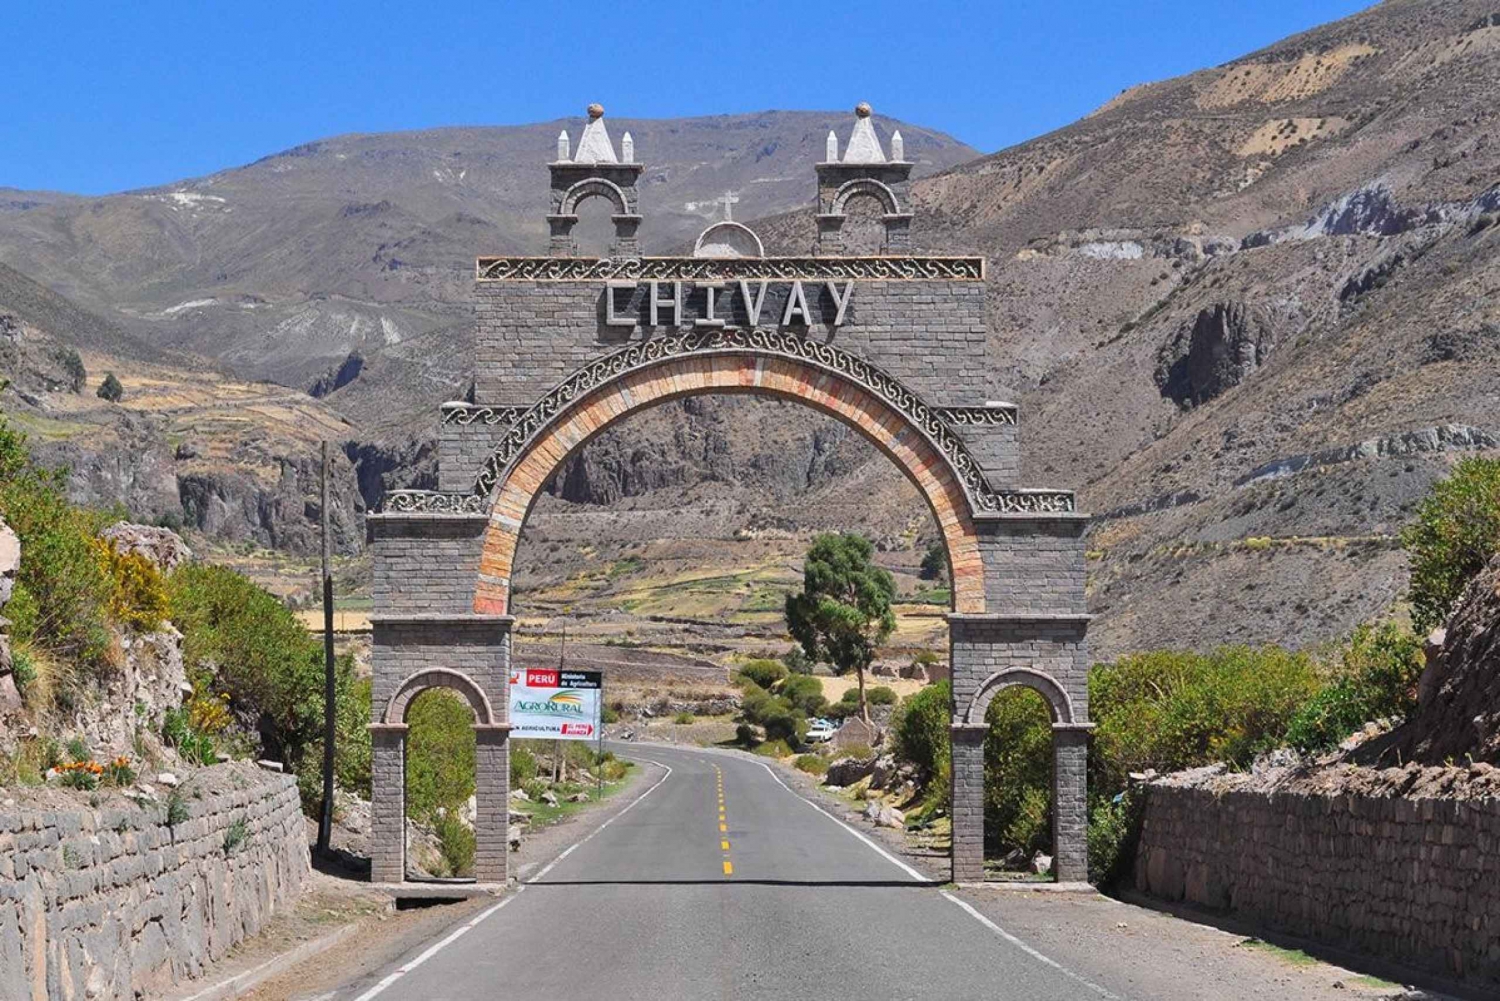 Arequipa: Excursion to Chivay and Colca Canyon